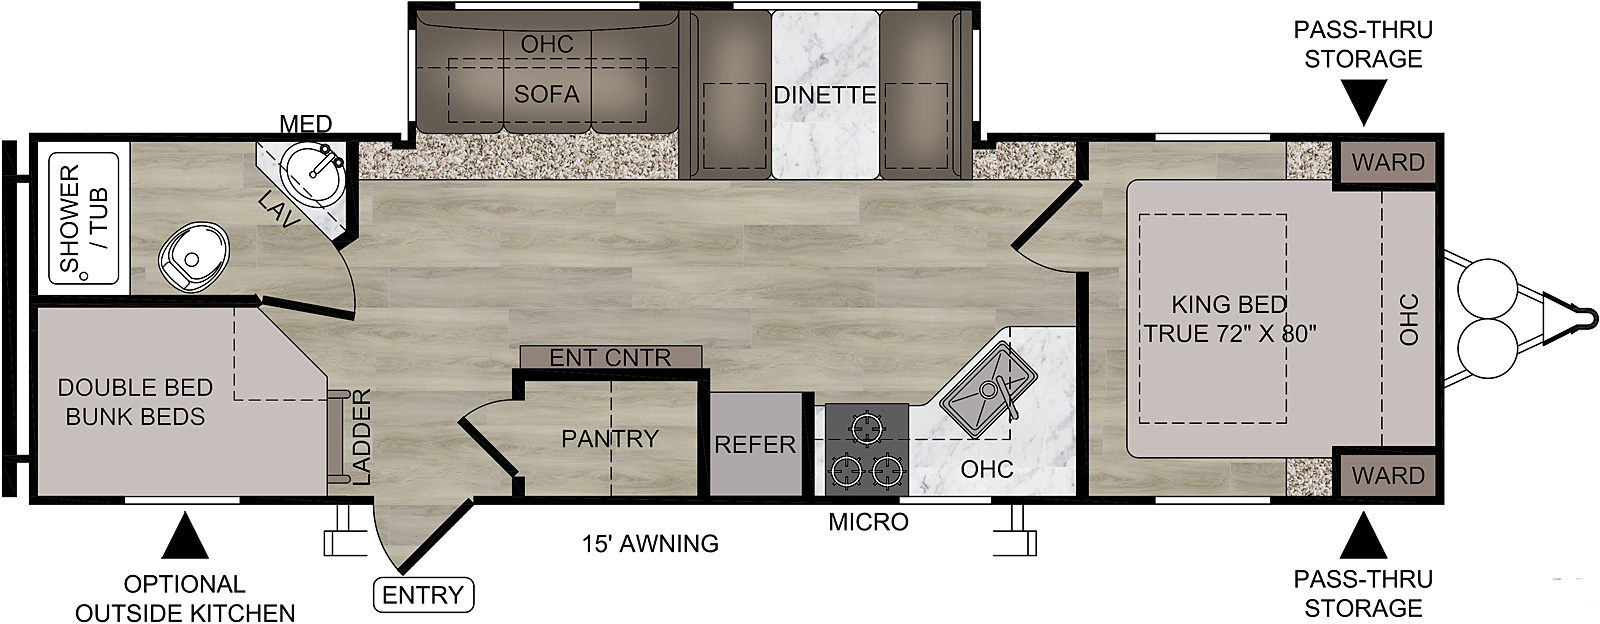 Della Terra 281BH floorplan. The 281BH has one slide out and one entry door.